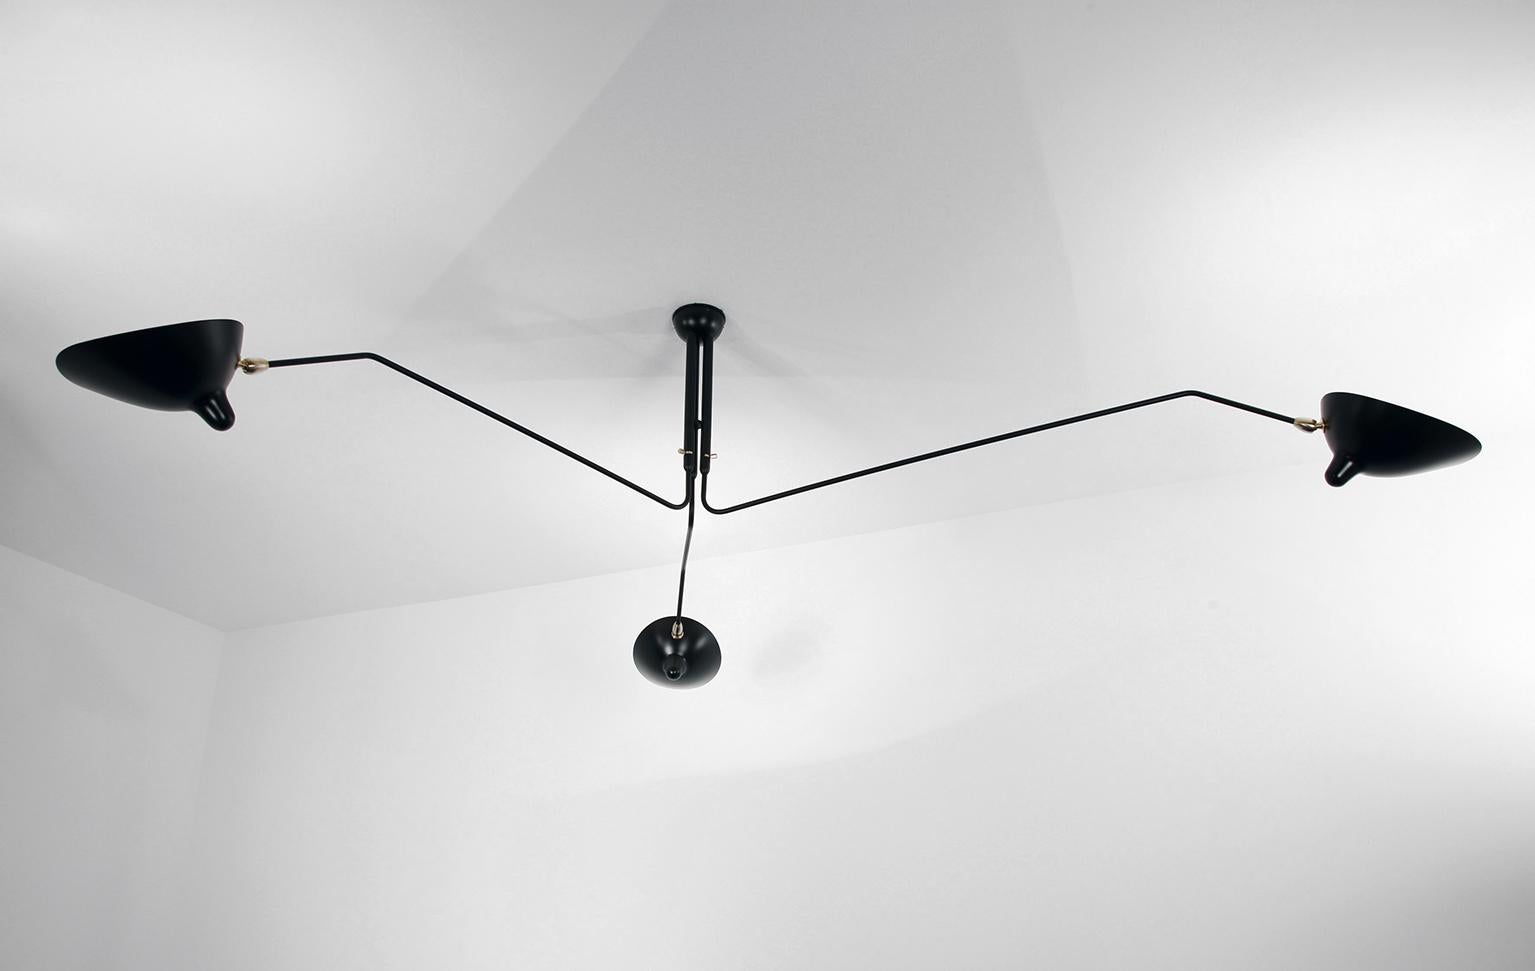 Serge Mouille Mid-Century Modern black three rotating arms ceiling lamp
Ceiling lamp model 'Three Rotating Arms Ceiling Lamp' designed by Serge Mouille in 1958.

Manufactured by Editions Serge Mouille in France. The production of lamps, wall lights